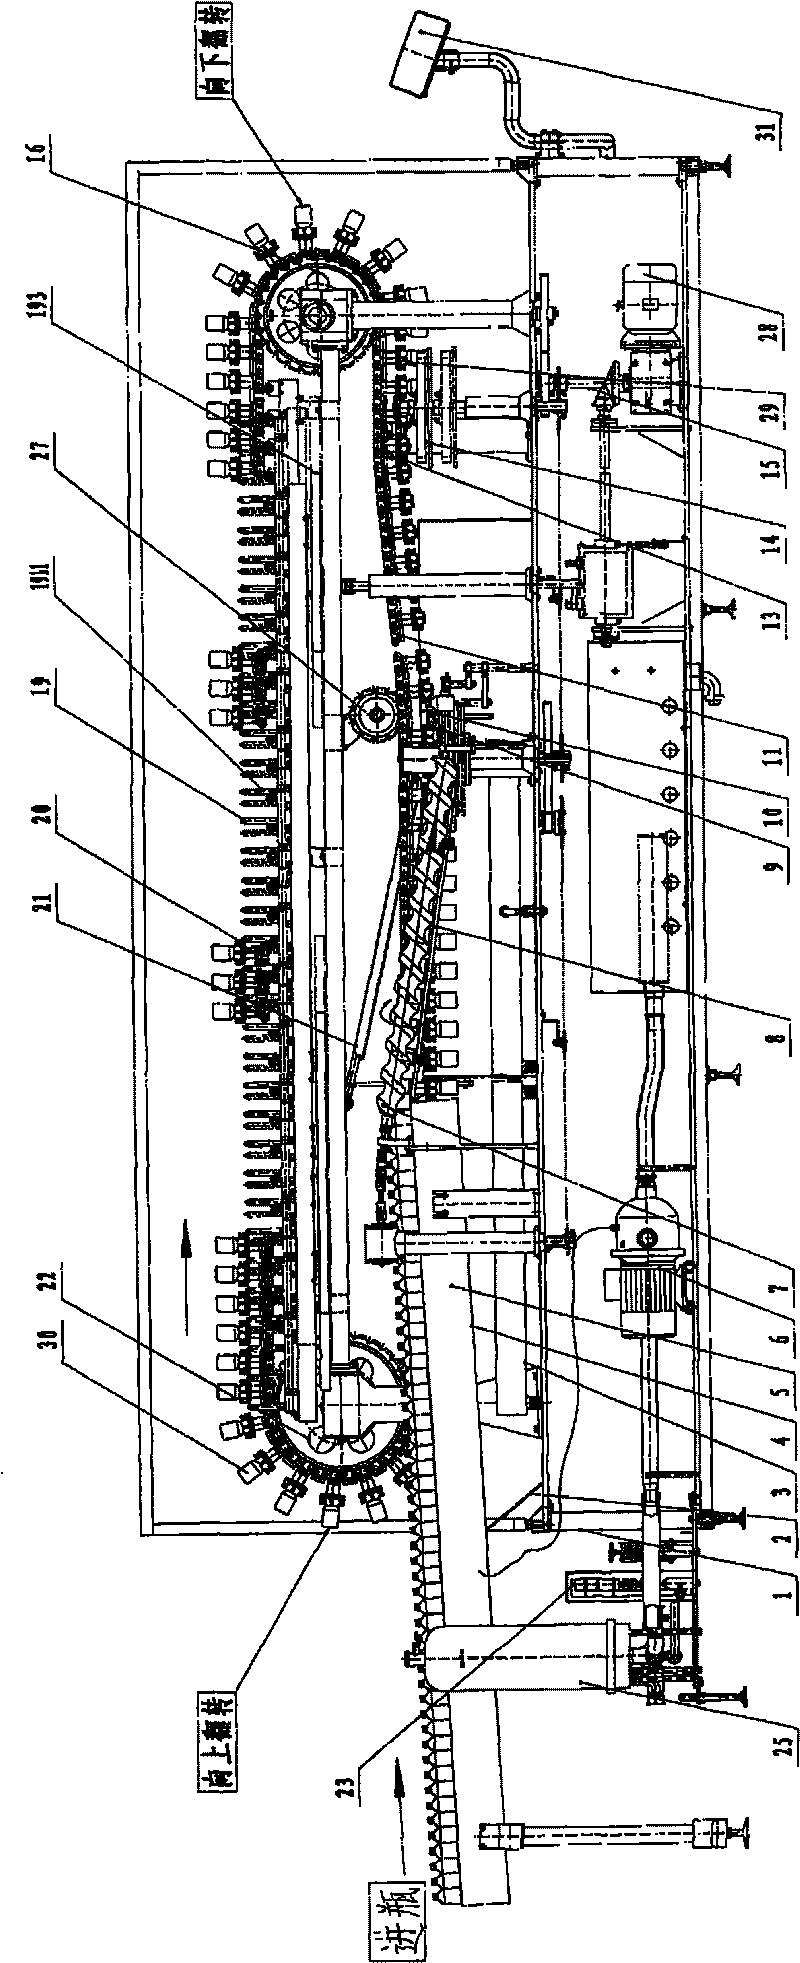 Line type supersonic wave bottle cleaning machine with separating bottle-in apparatus